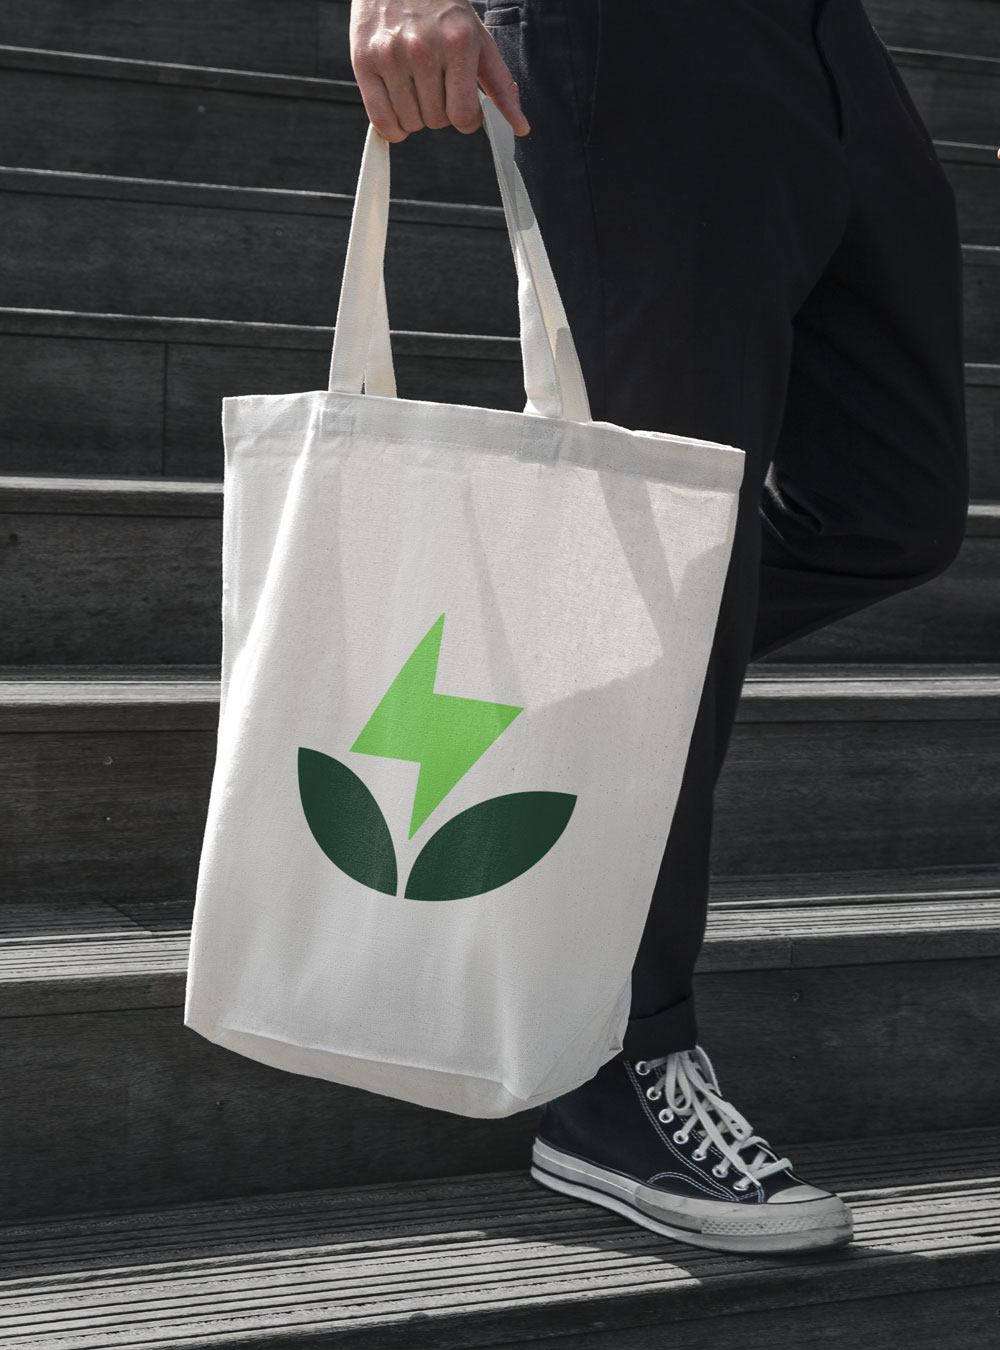 buzzsprout_tote-1